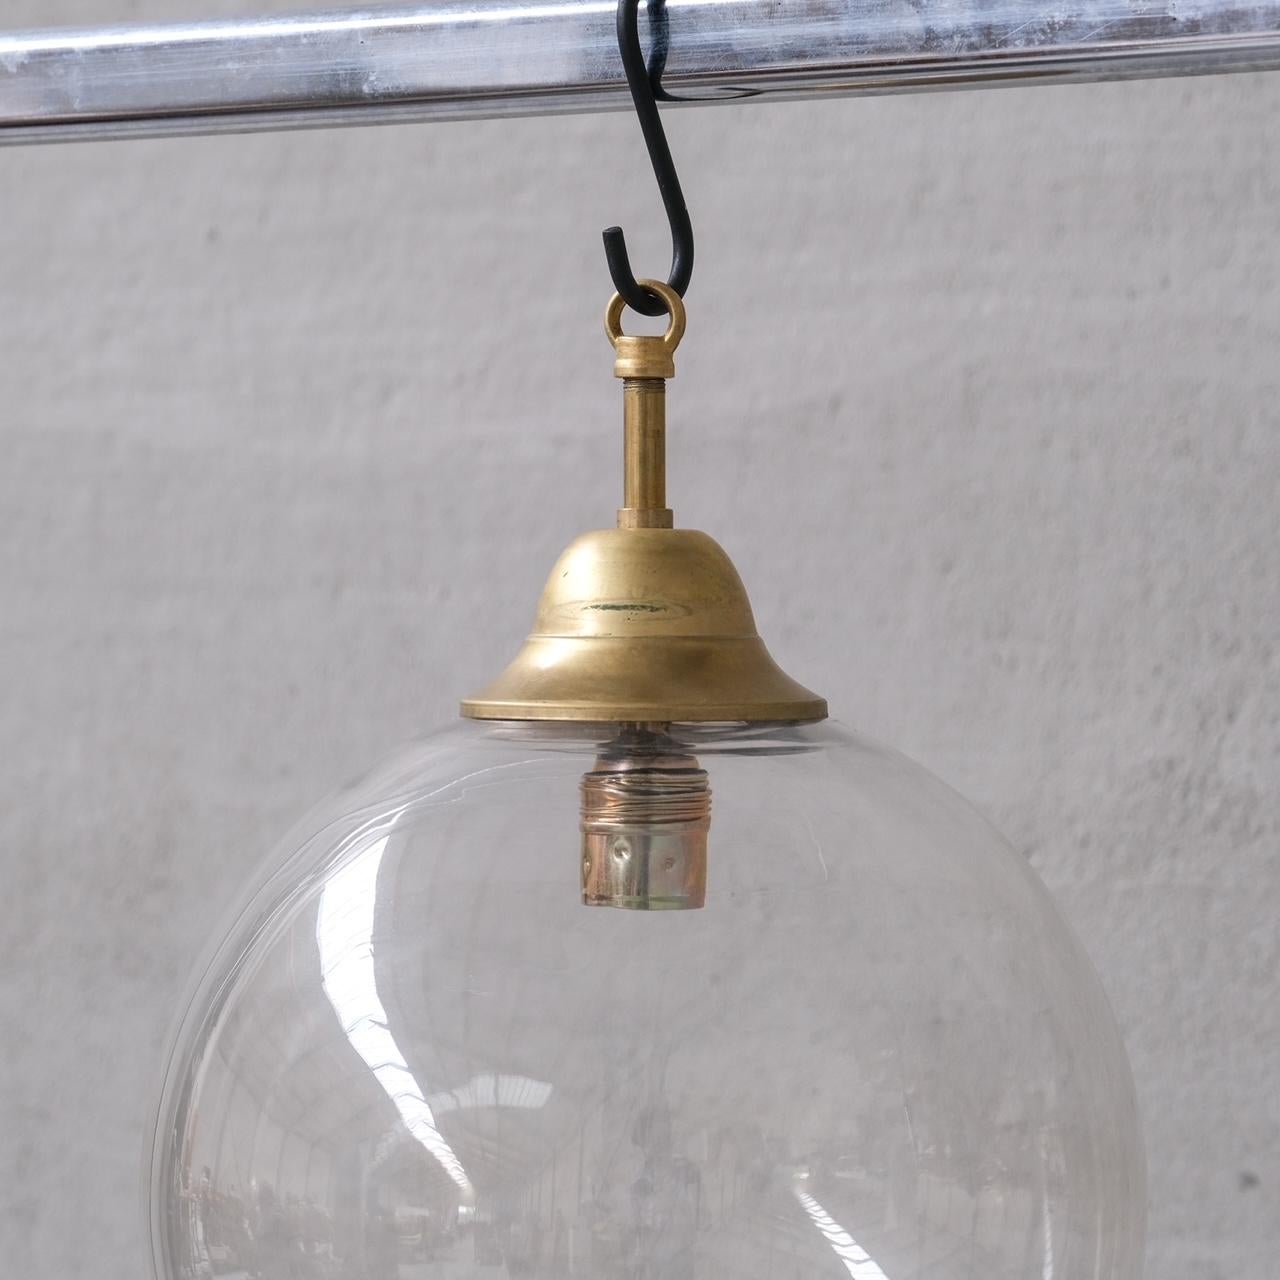 A clear glass and brass pendant lights.

Italy, c1980s.

PRICED AND SOLD INDIVIDUALLY.

15 pieces available at the time of listing.

No chain or rose was retained, however they are easy to source online.

Good vintage condtion, re-wired and PAT